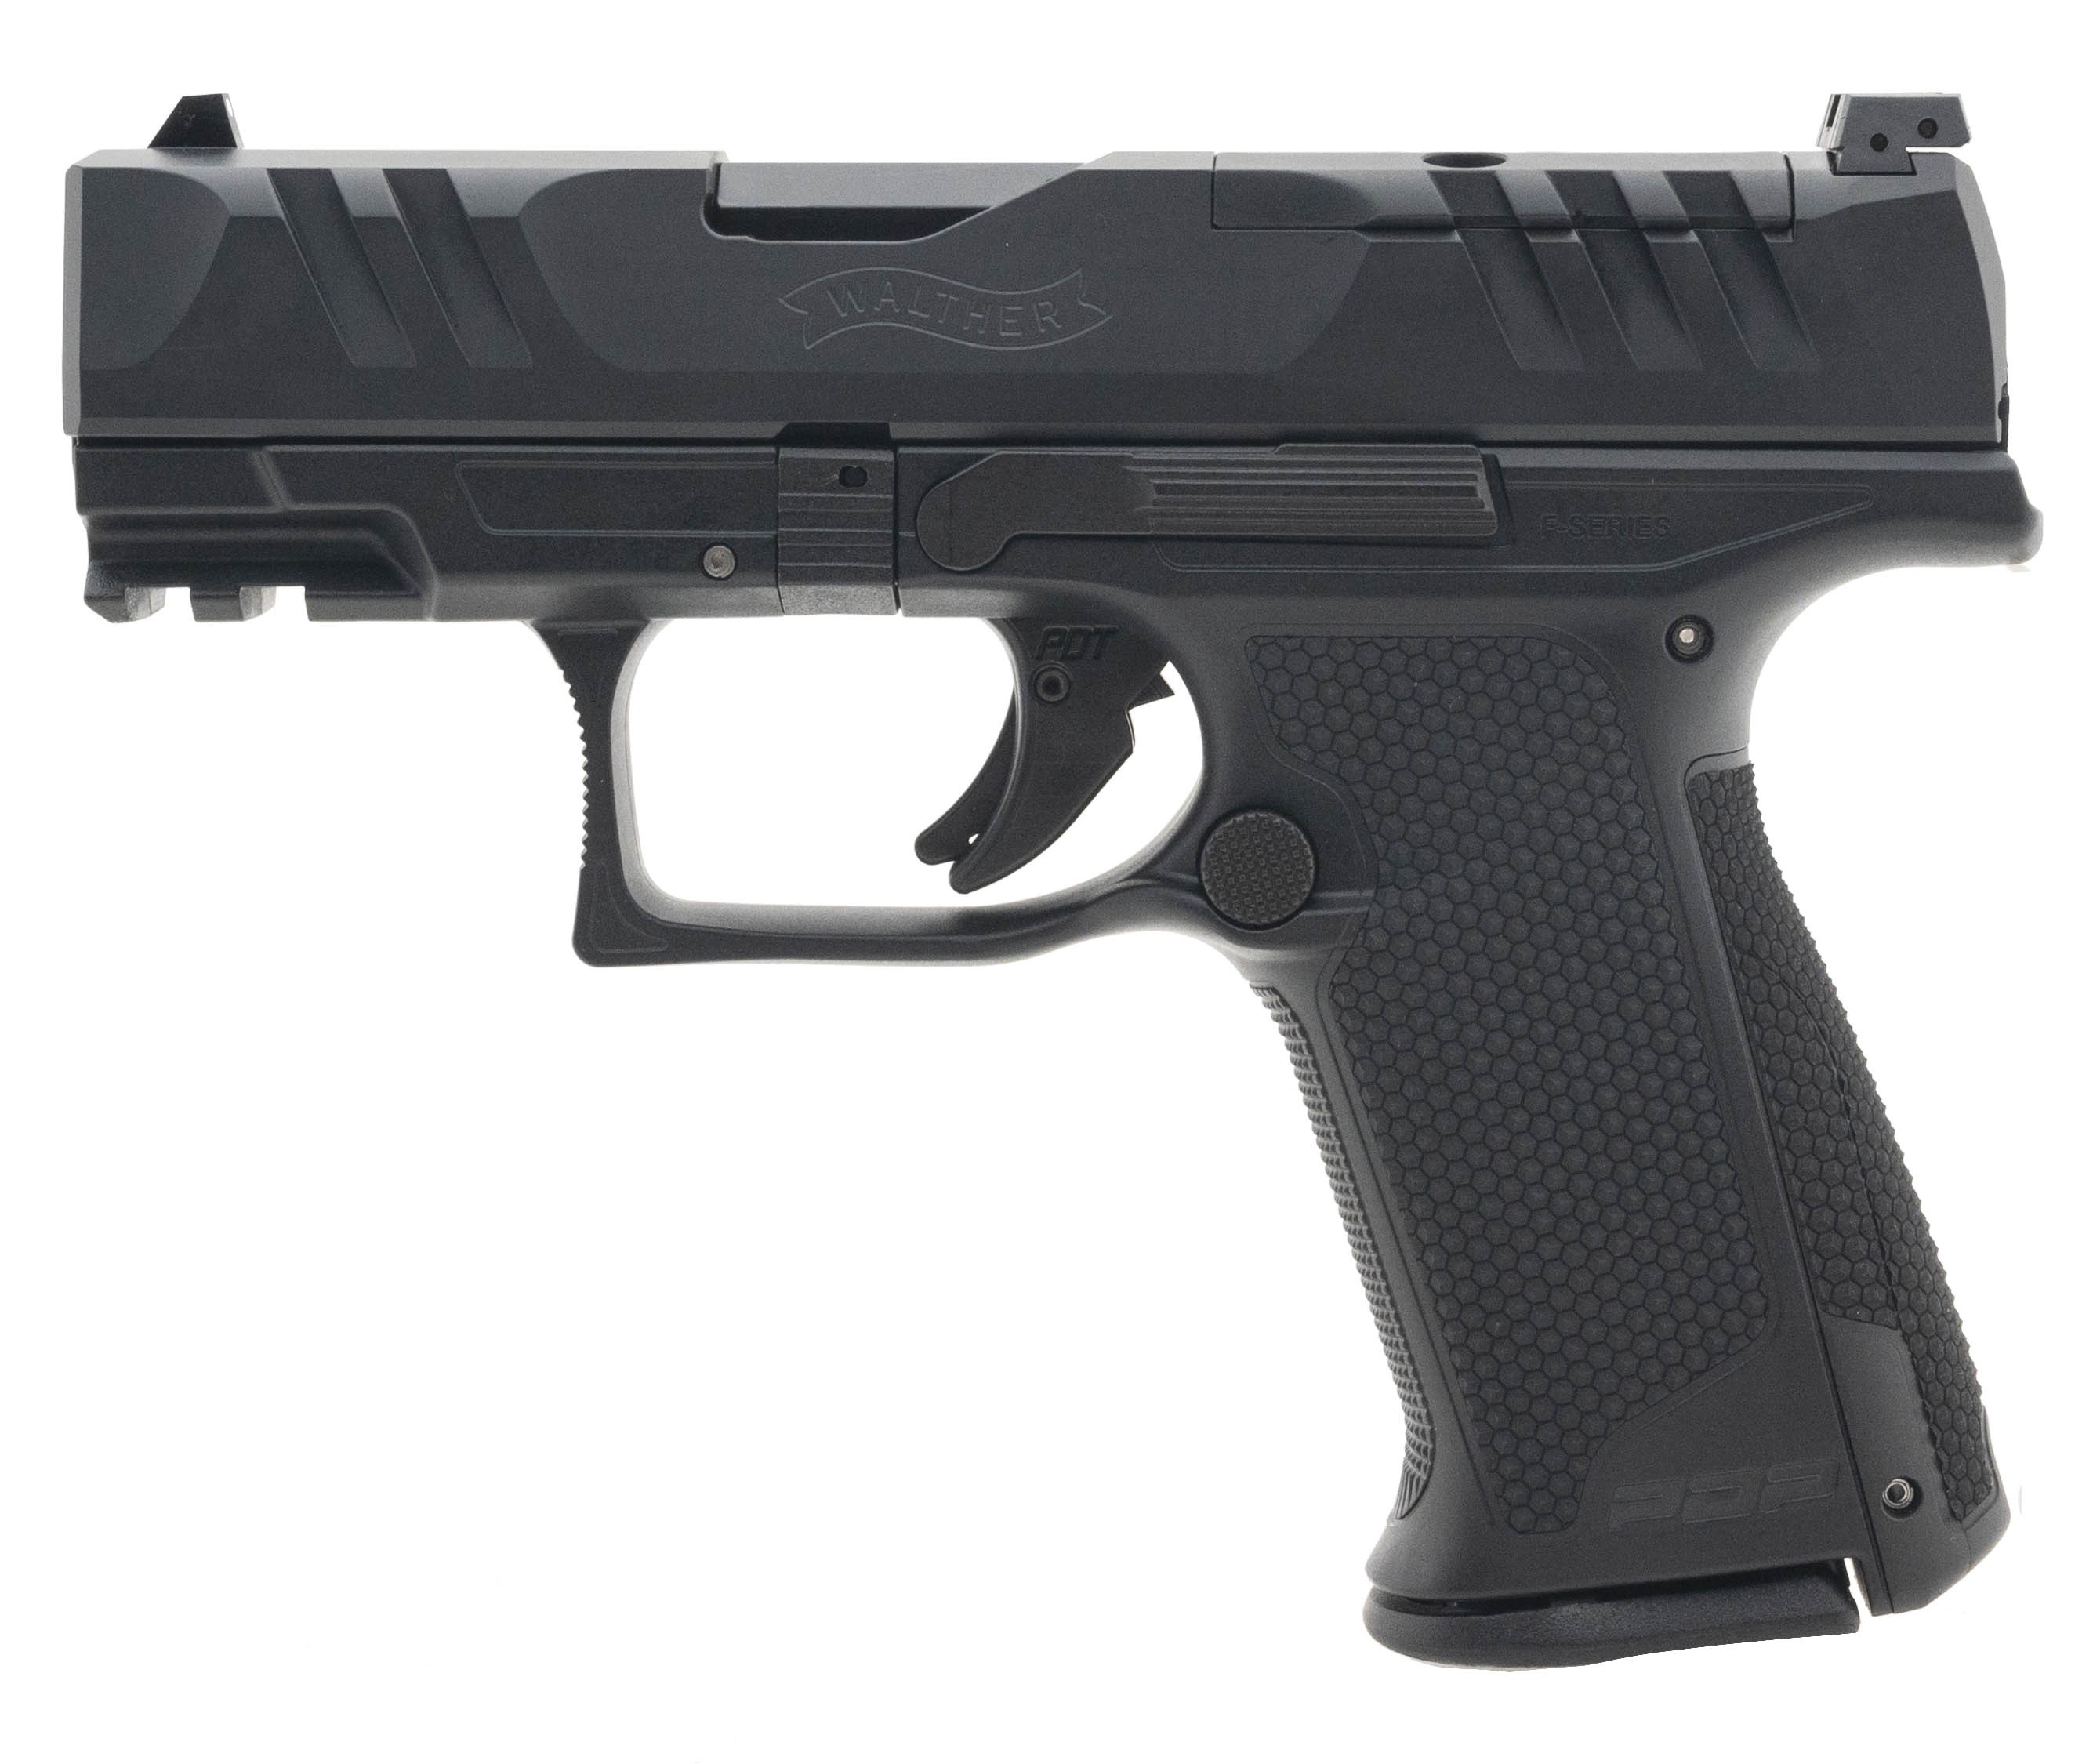 walther-pdp-f-series-pistol-9mm-ngz2283-new